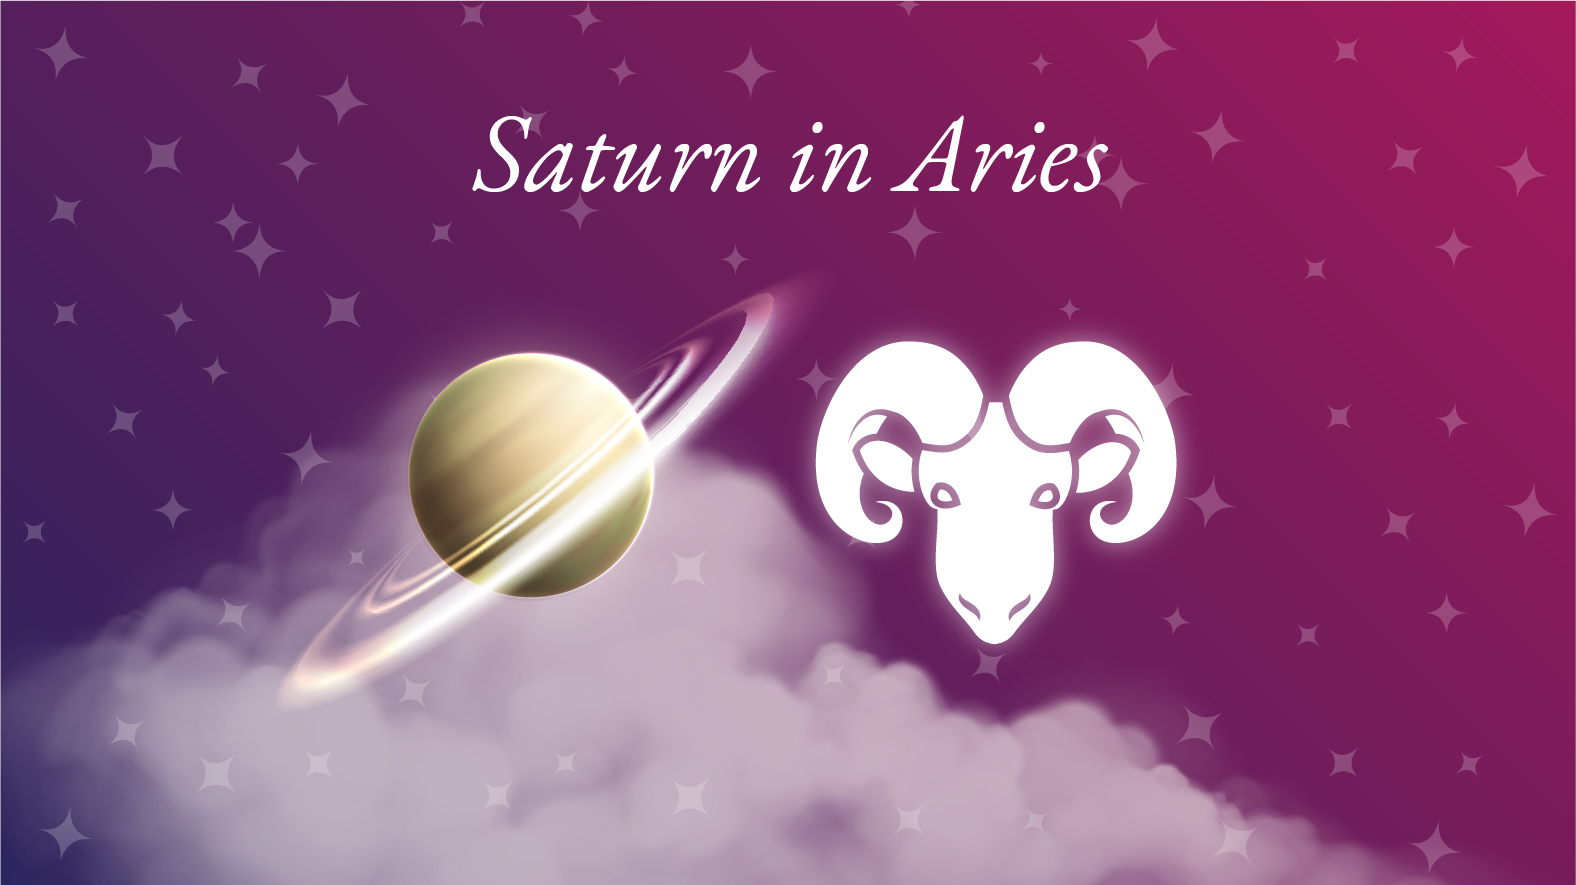 Saturn in Aries Meaning